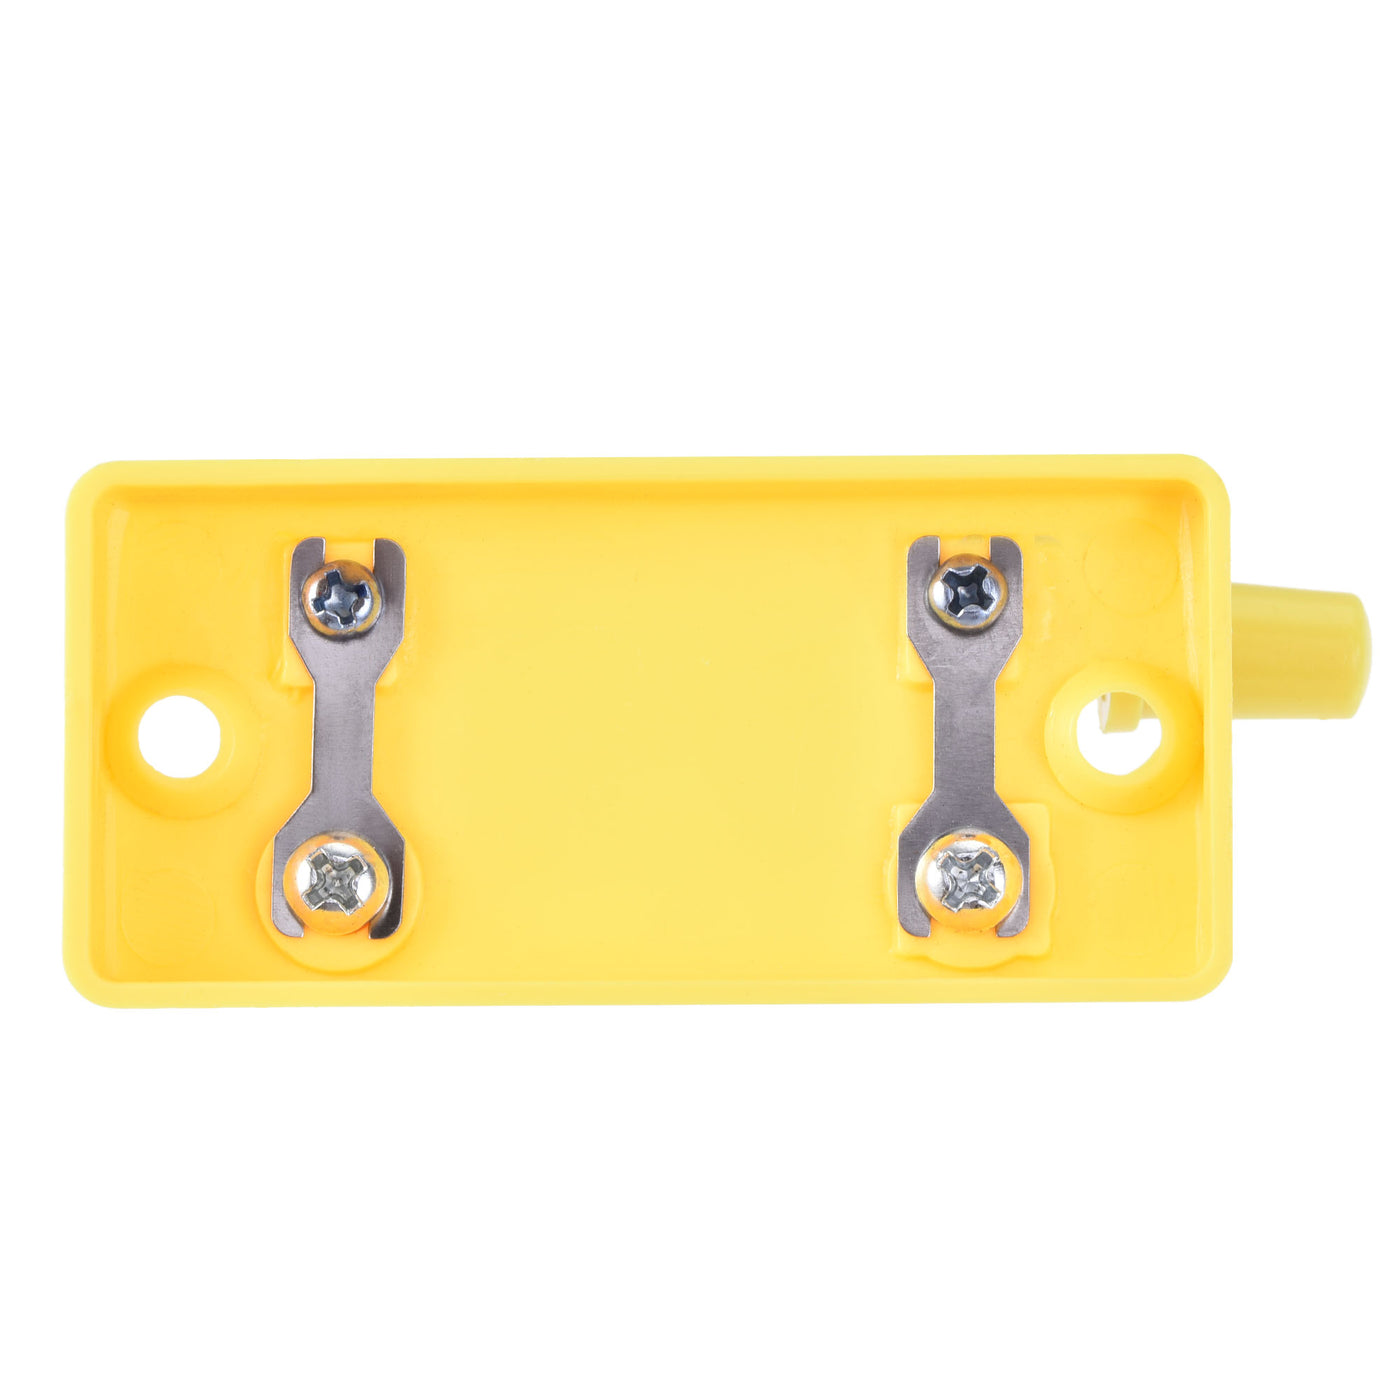 uxcell Uxcell Single Pole Switch Single Pole Single Throw (SPST) Switch Yellow